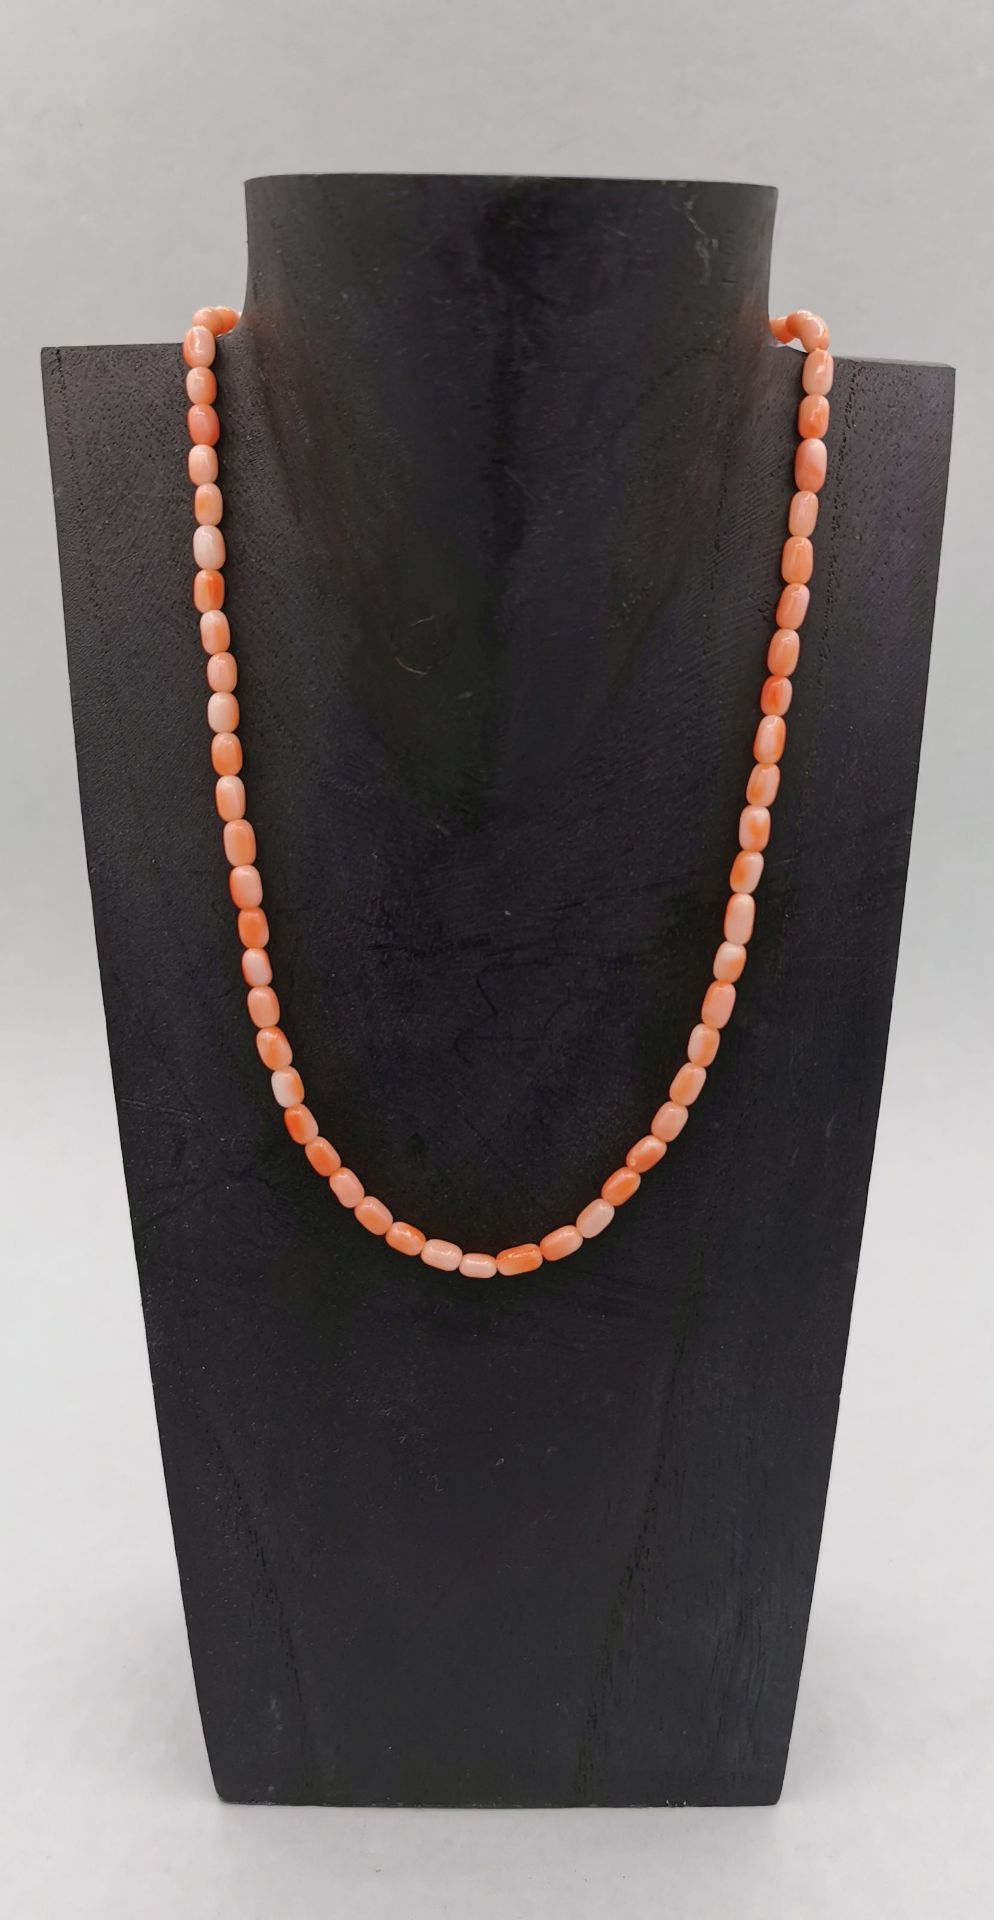 2 ENGEL SKIN CORAL - CHAINS - Image 3 of 4